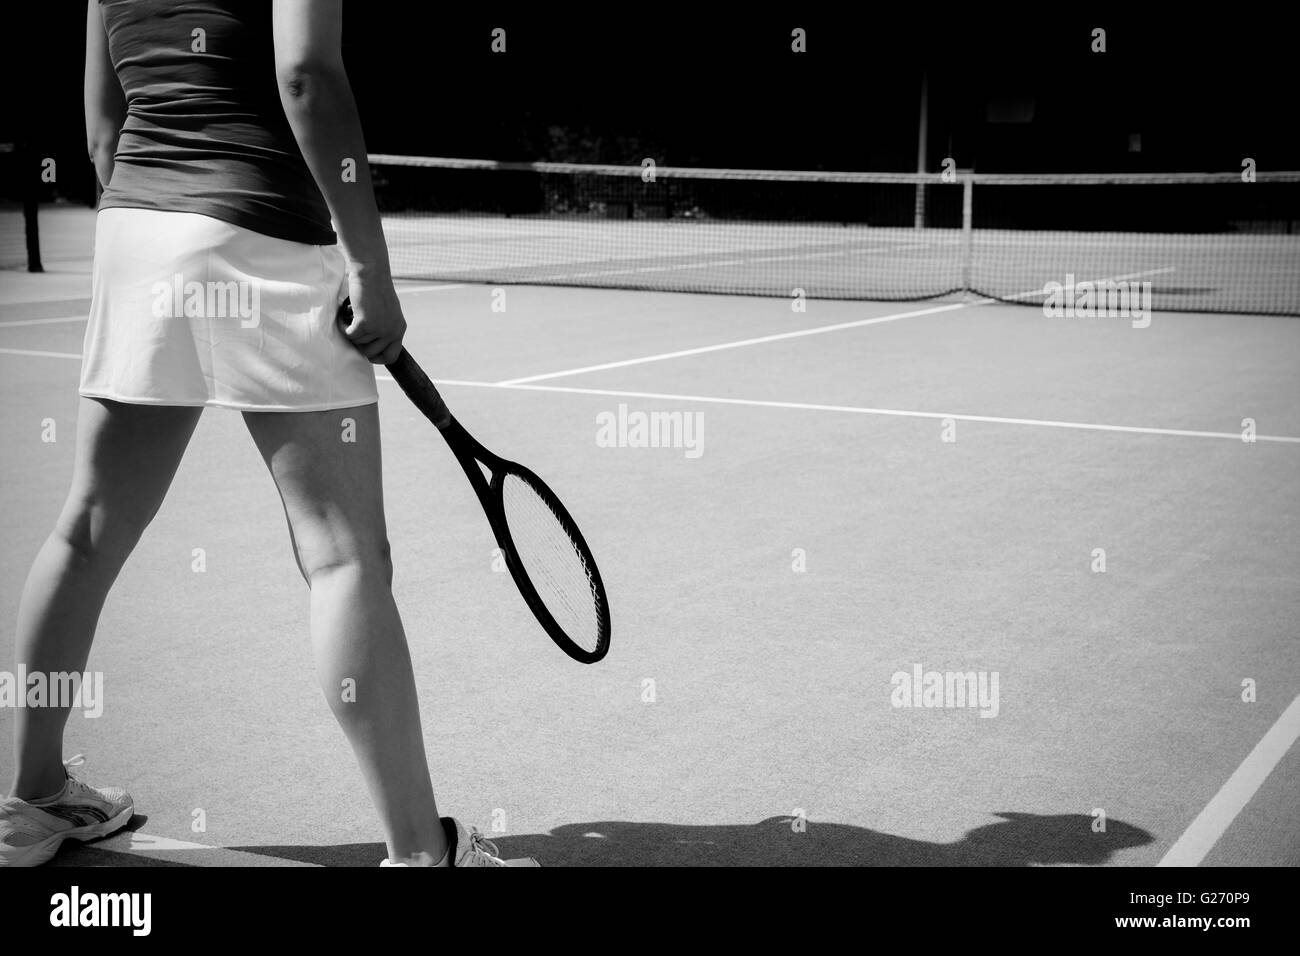 Tennis player standing on court Stock Photo